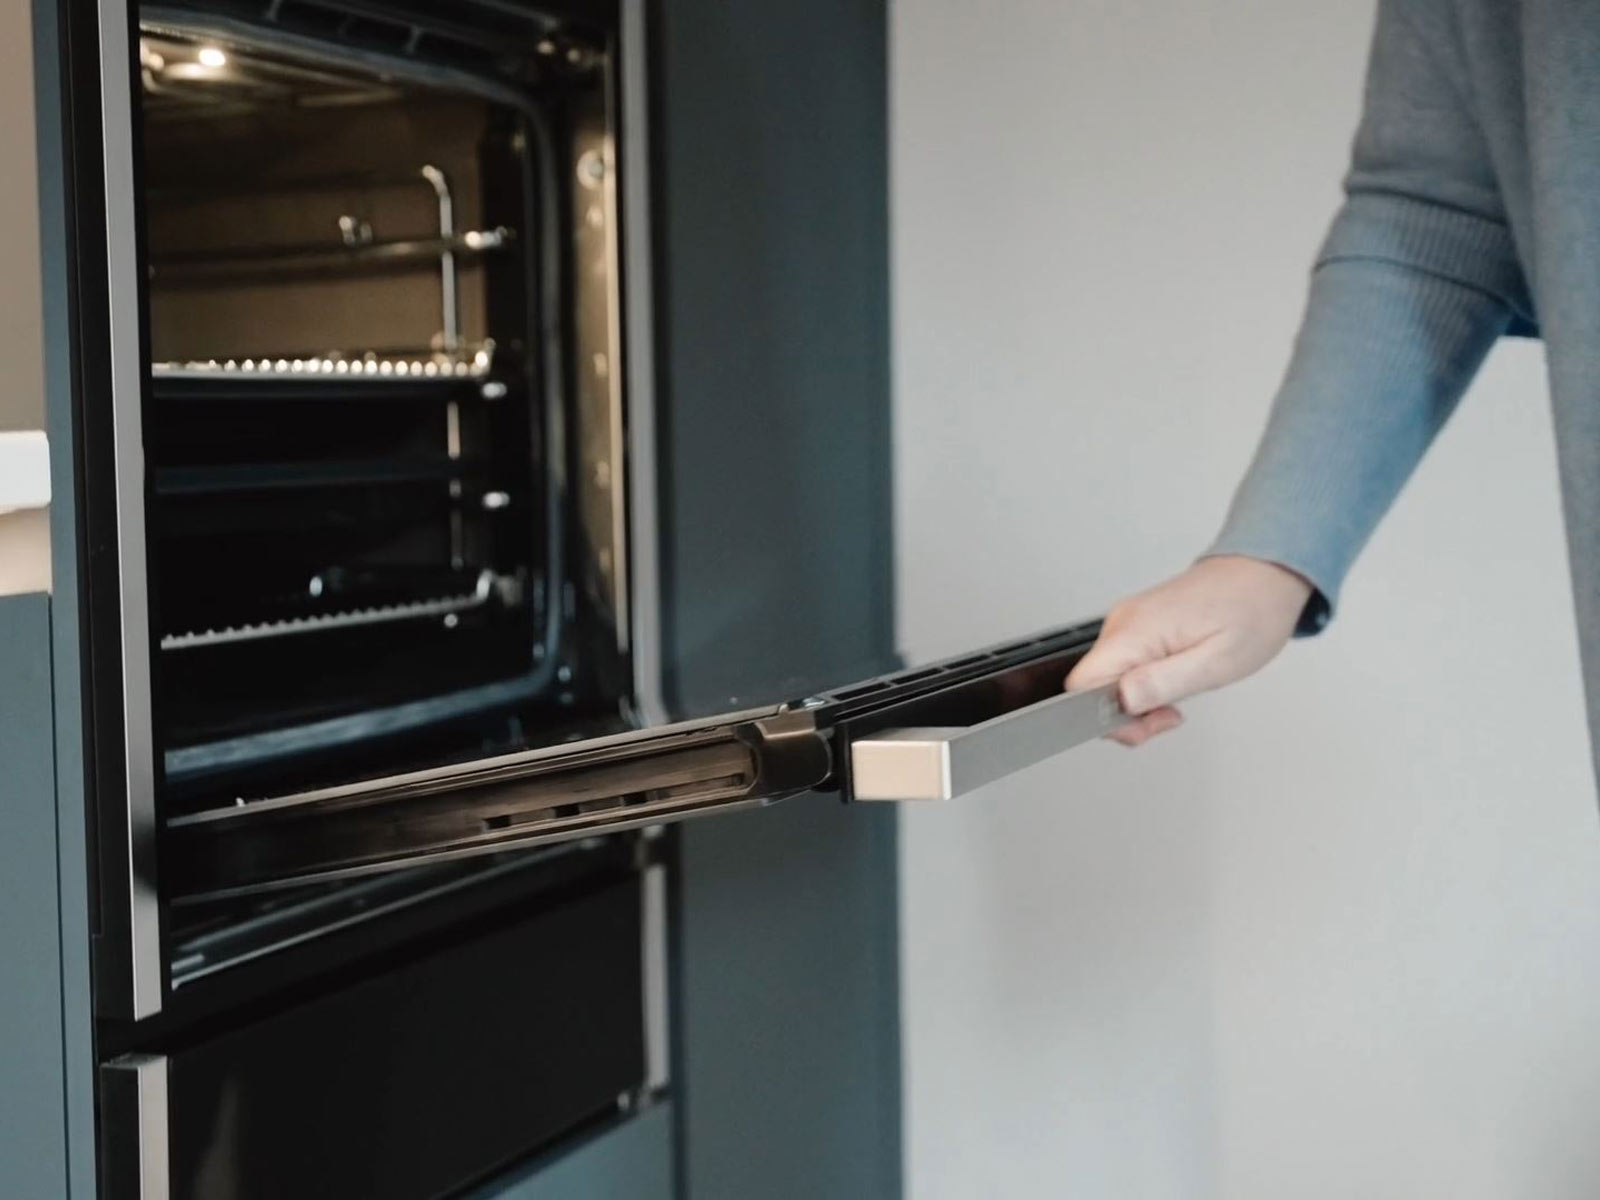 A Neff hide and slide oven, demonstrated by Lisa in her grey handleless kitchen